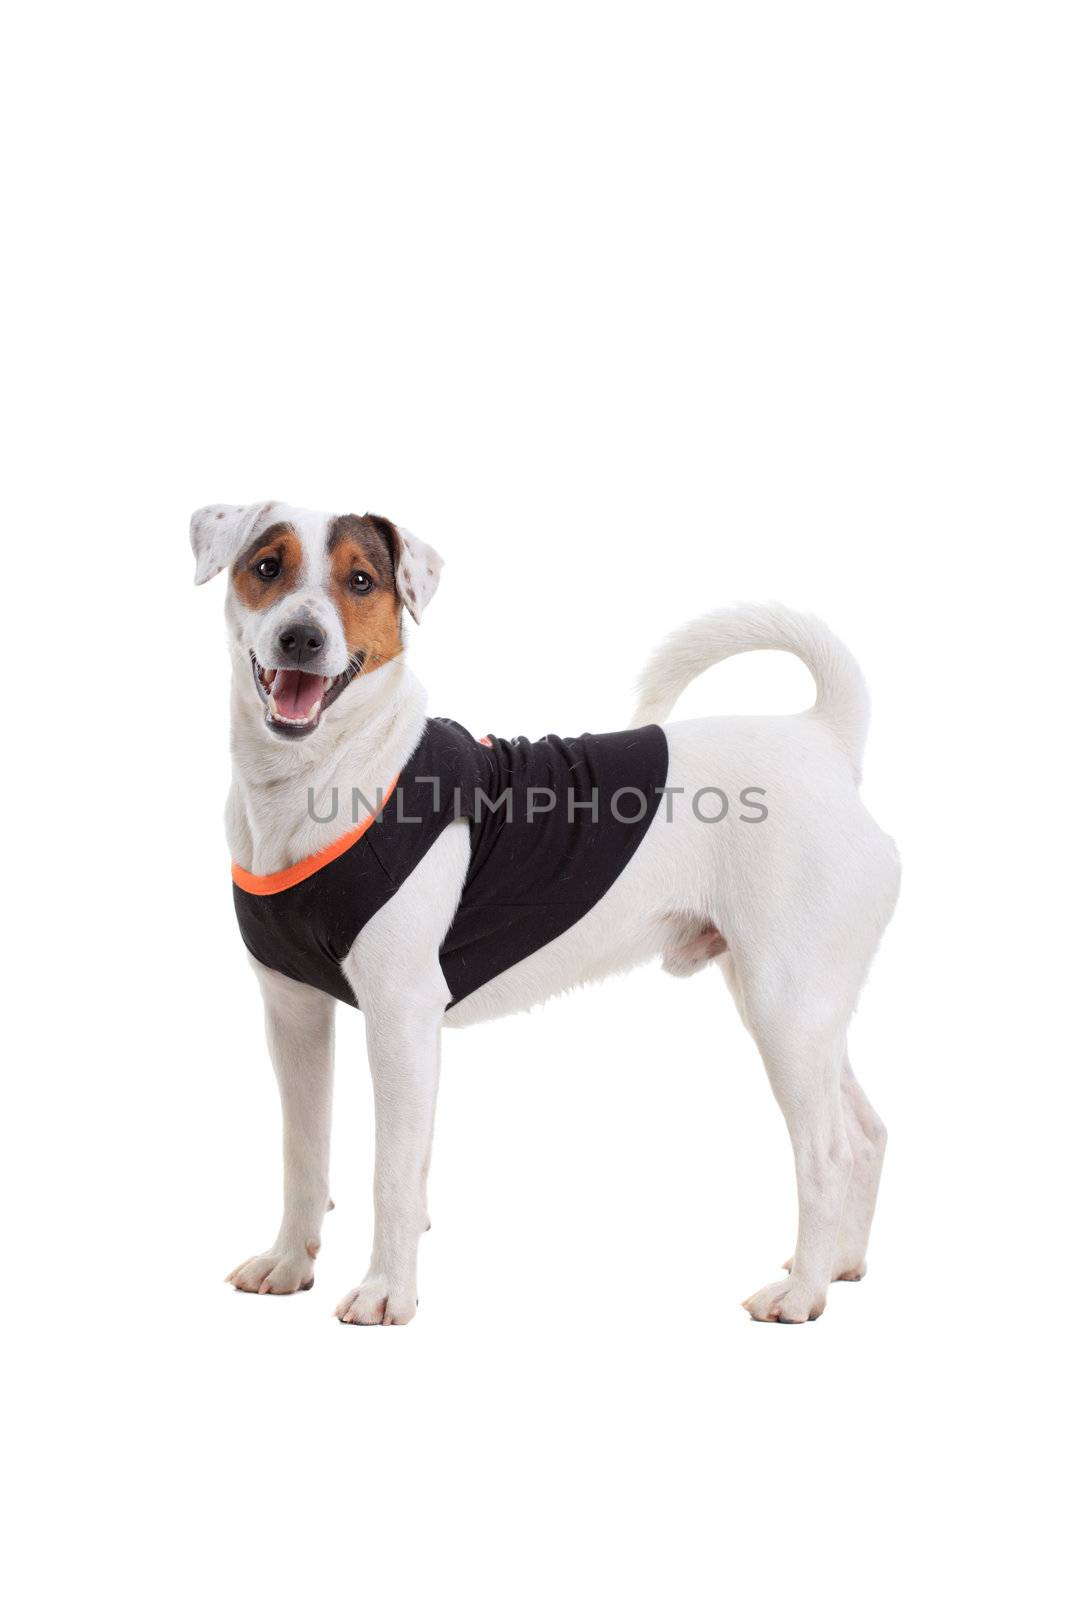 Jack Russel Terrier purebred dog isolated on white background